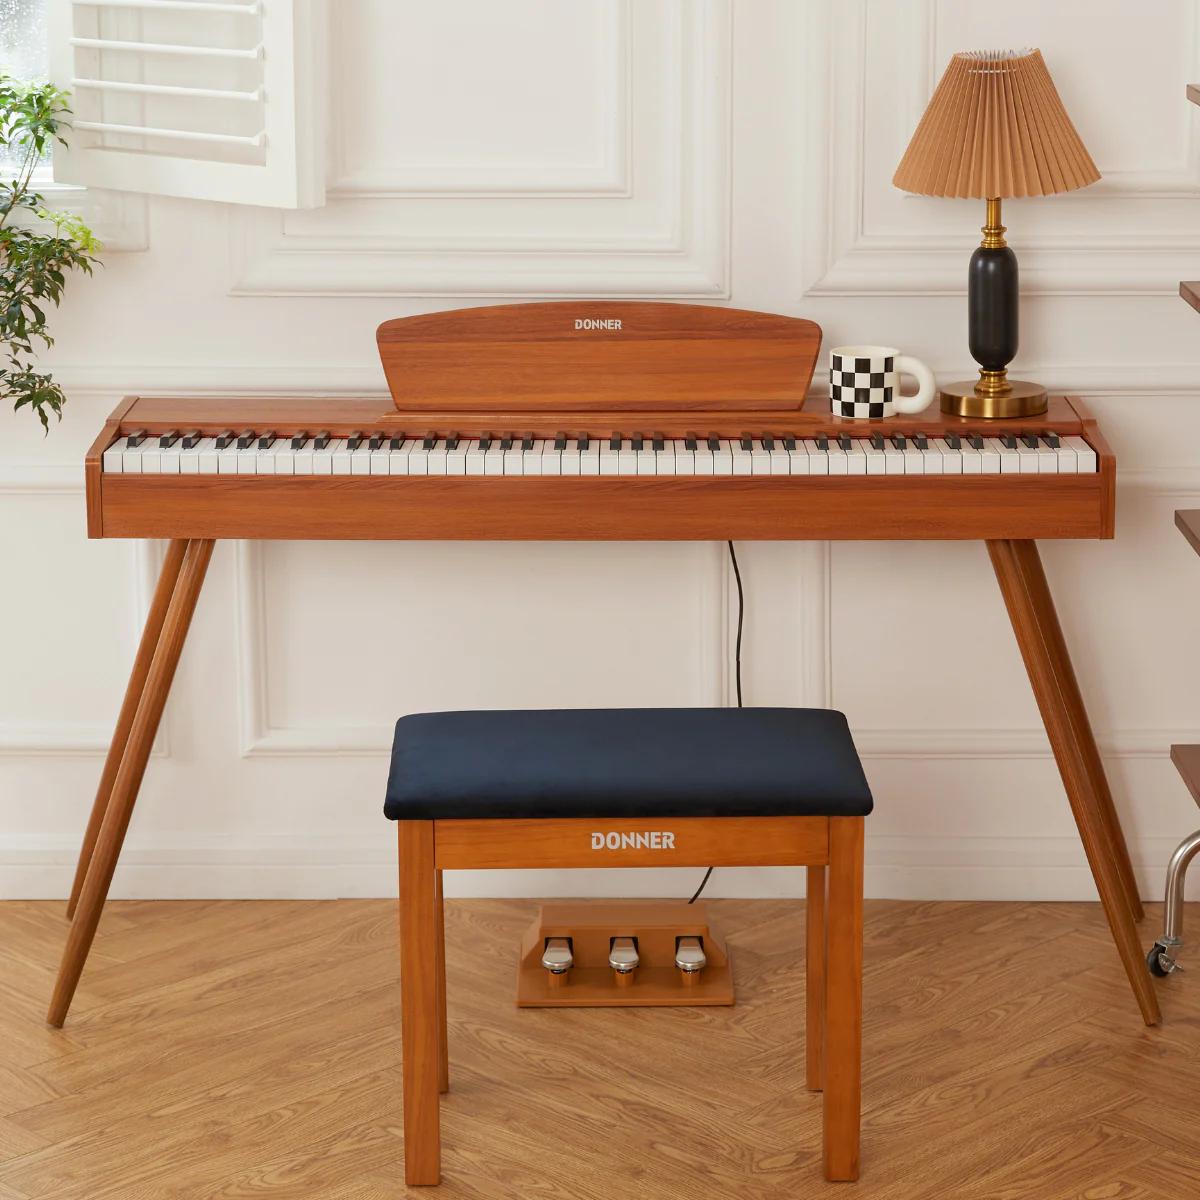 Wooden Style Home Digital Piano